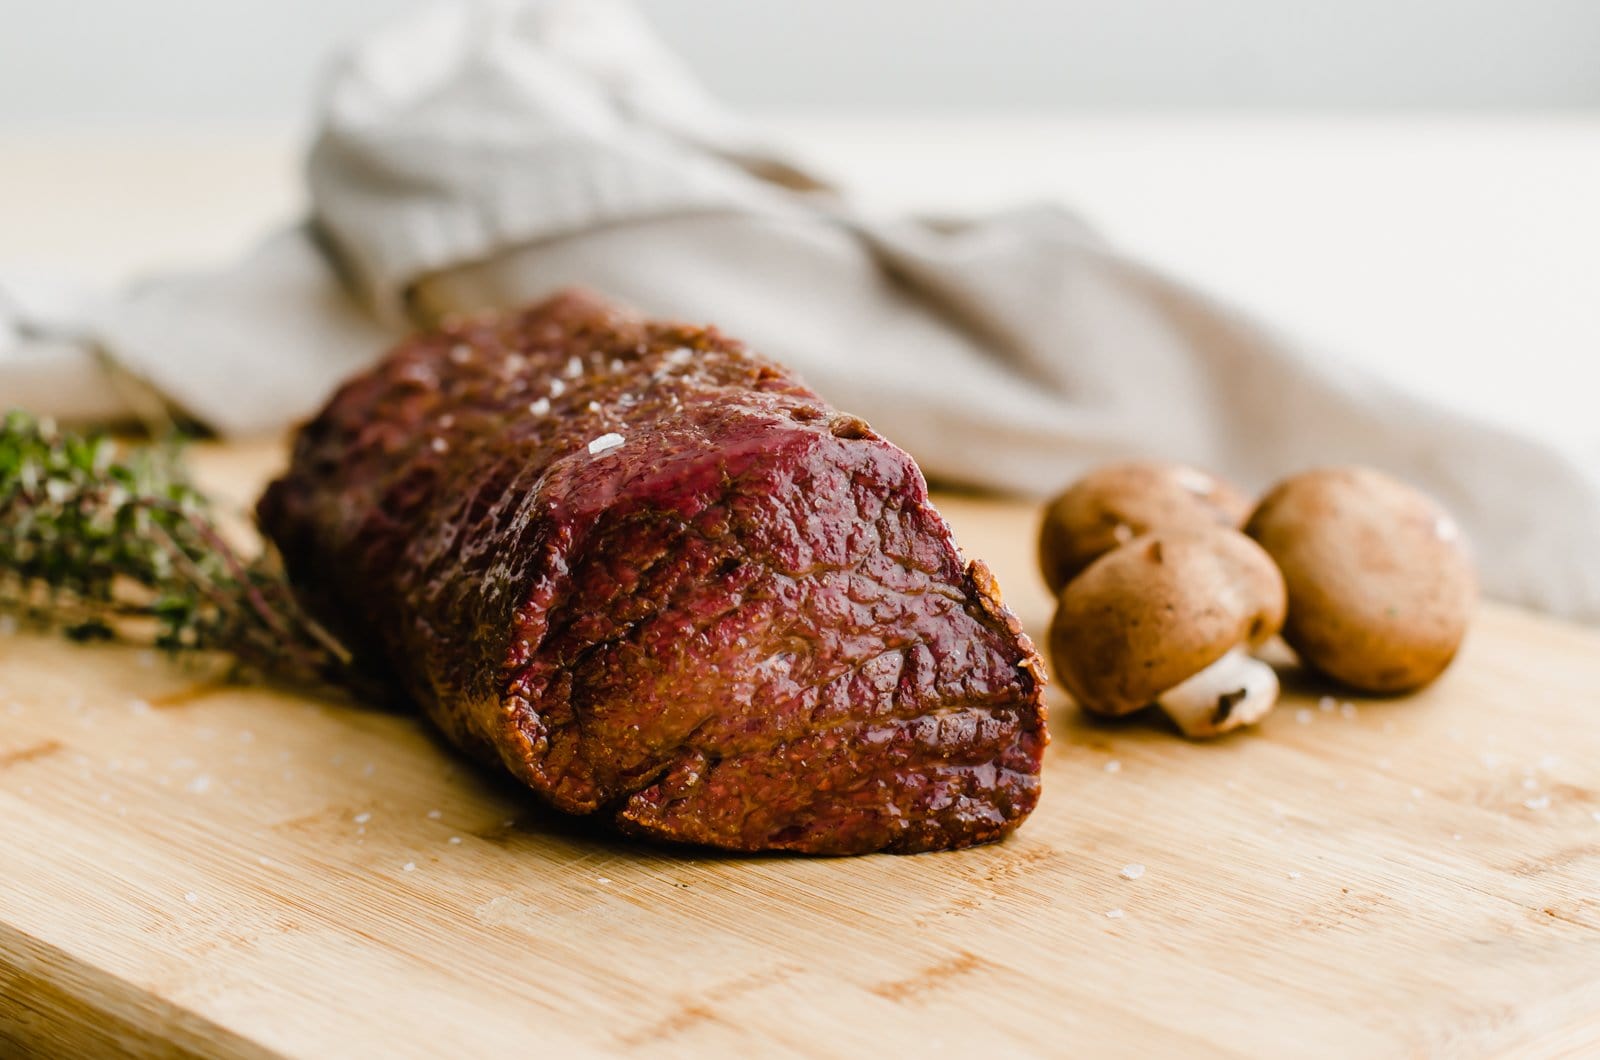 A close up of a roasted beef tenderloin on a cutting board with mushrooms on the side.